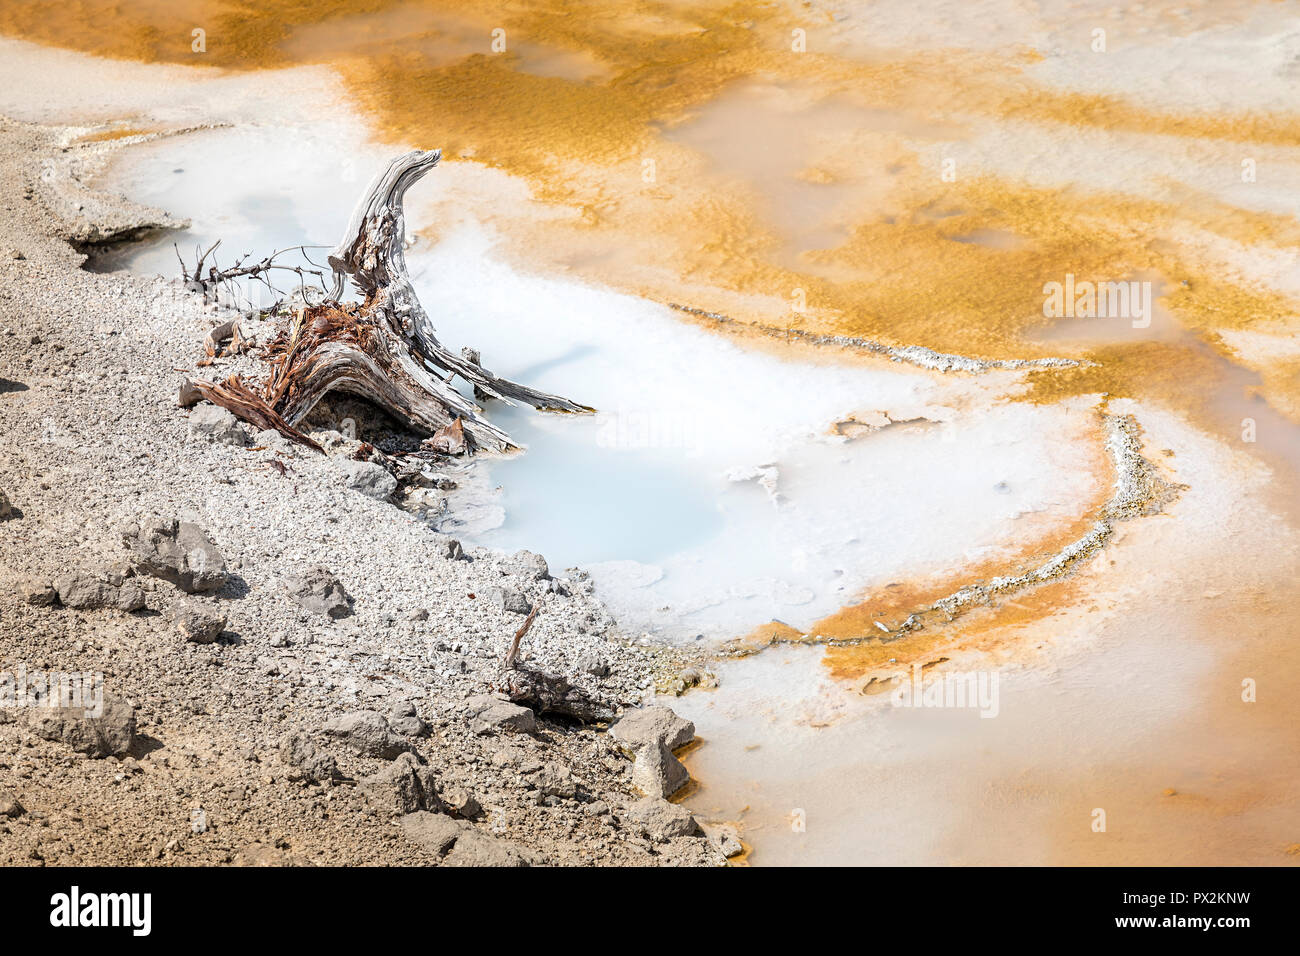 Dead wood at edge of geyser, Norris Geyser Basin, Yellowstone National Park, Wyoming, USA Stock Photo